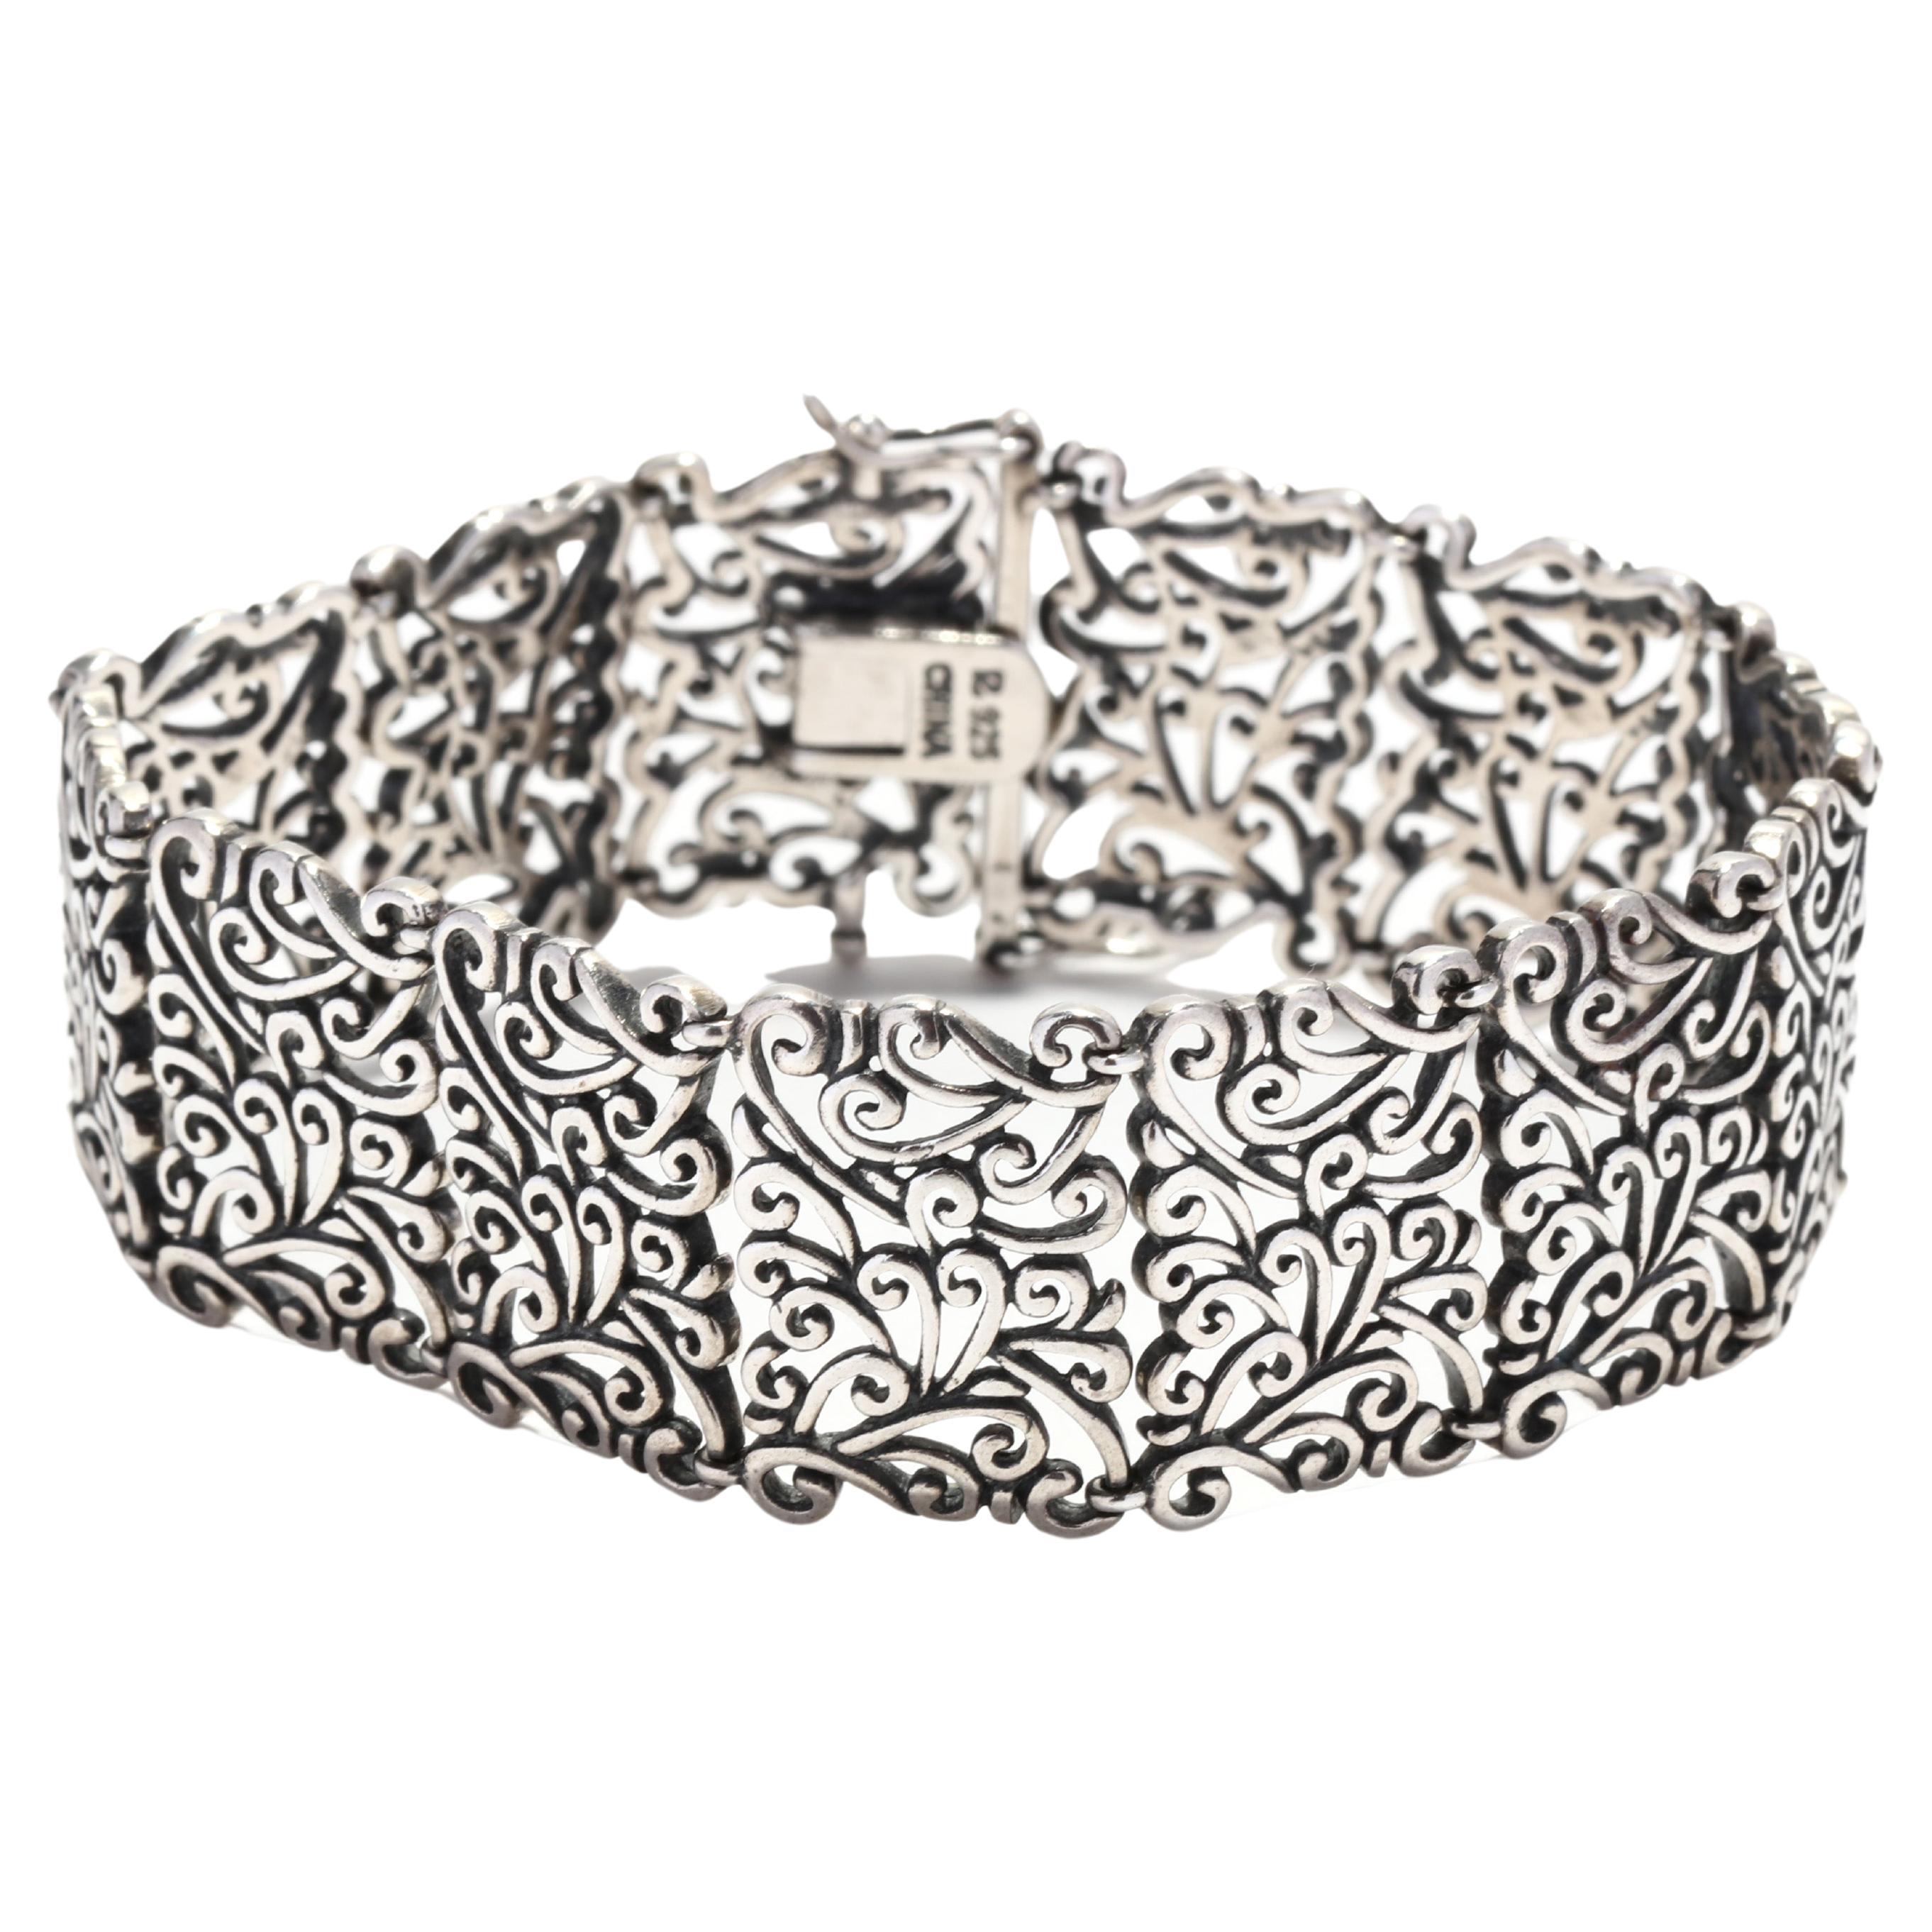 Wide Filigree Bracelet, Sterling Silver, Length 7.25 Inches, Wide Silver 